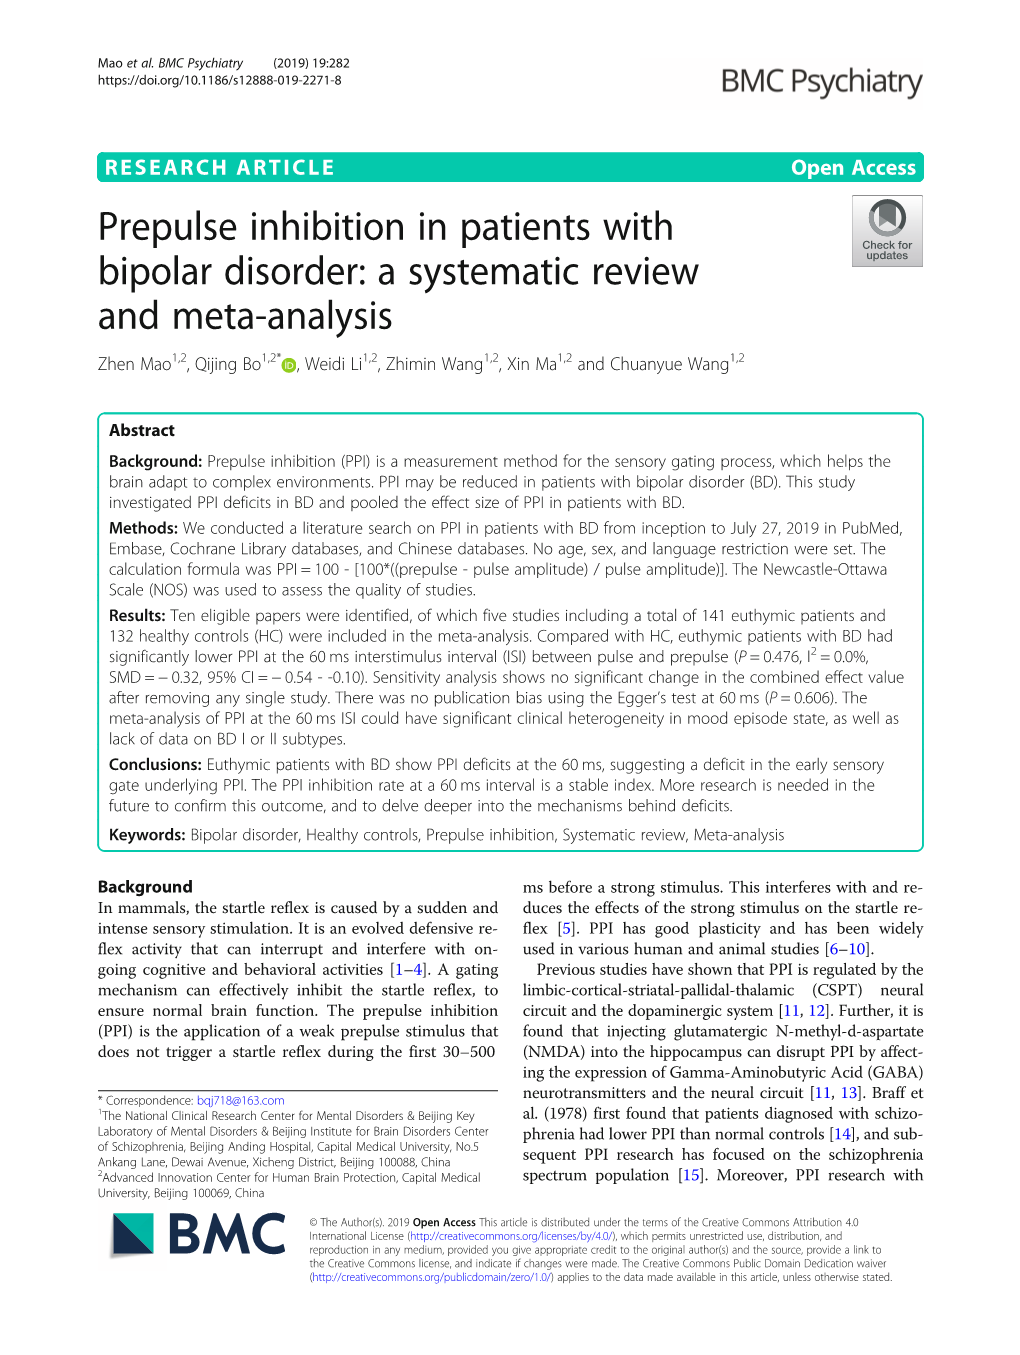 Prepulse Inhibition in Patients with Bipolar Disorder